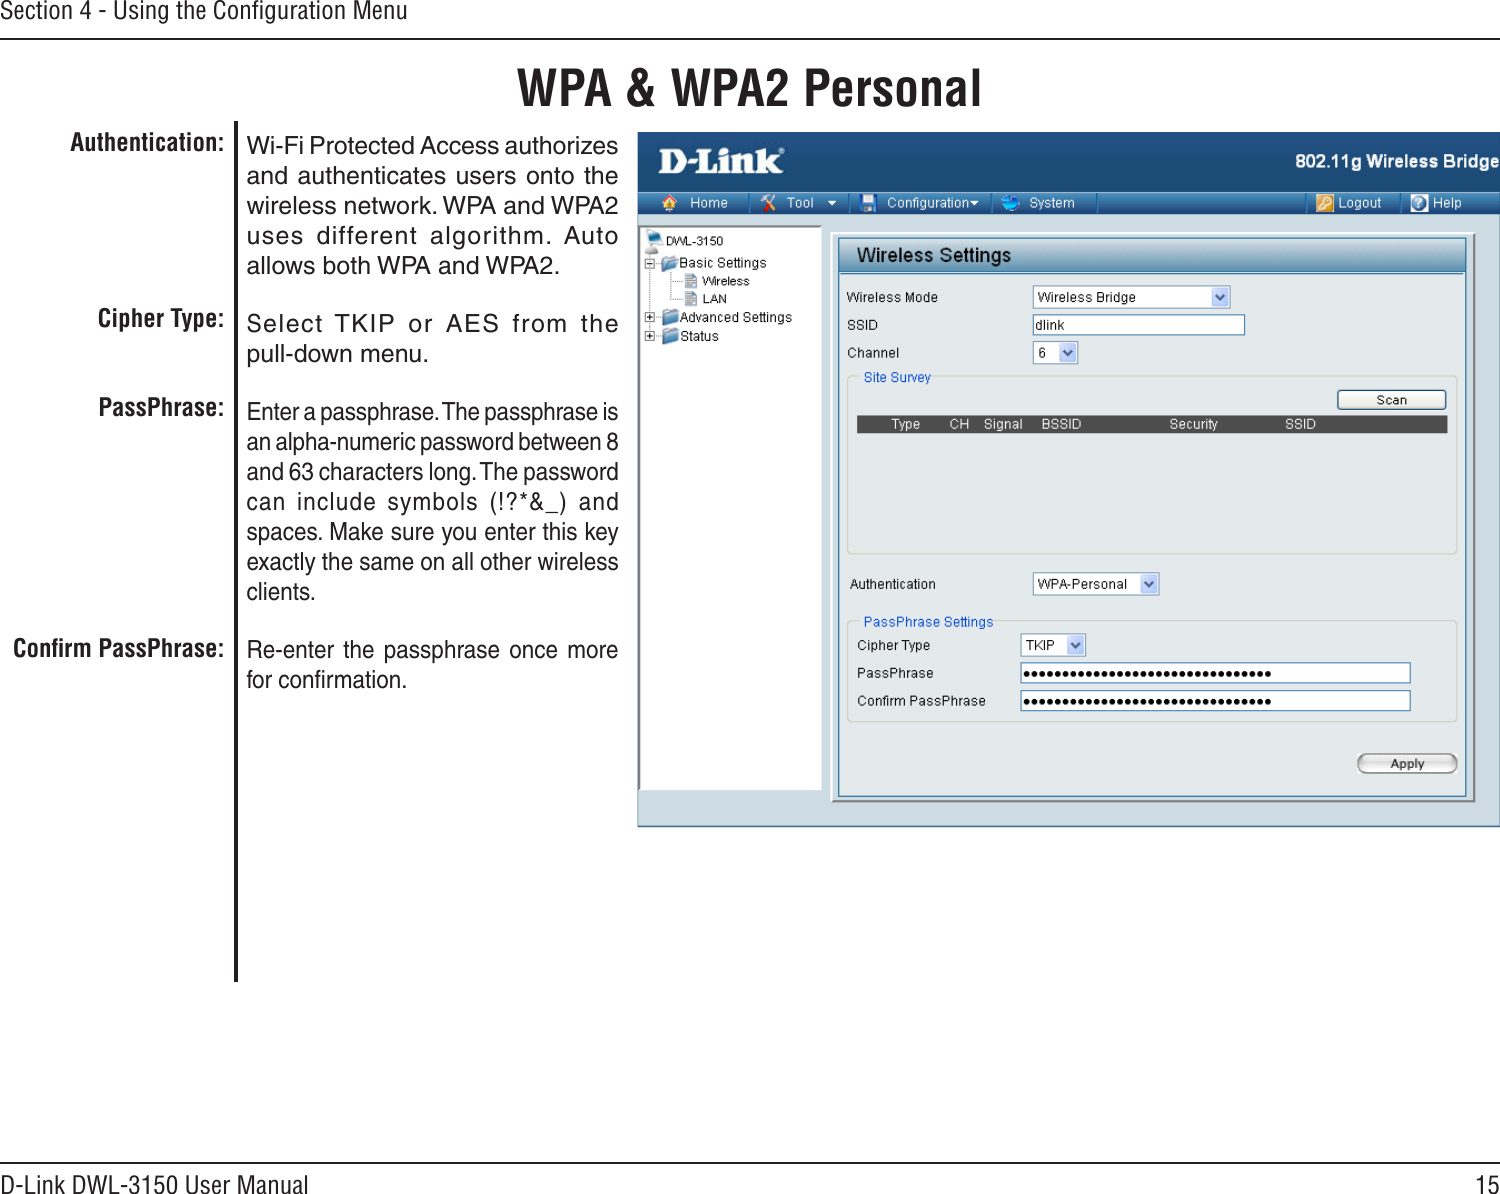 15D-Link DWL-3150 User ManualSection 4 - Using the Conﬁguration MenuWPA &amp; WPA2 PersonalWi-Fi Protected Access authorizes and authenticates users onto the wireless network. WPA and WPA2 uses  different  algorithm.  Auto allows both WPA and WPA2.Select TKIP  or  AES  from  the  pull-down menu.Enter a passphrase. The passphrase is an alpha-numeric password between 8 and 63 characters long. The password can  include  symbols  (!?*&amp;_)  and spaces. Make sure you enter this key exactly the same on all other wireless clients.Re-enter  the  passphrase  once  more for conﬁrmation.Authentication:Cipher Type:PassPhrase:Conﬁrm PassPhrase: